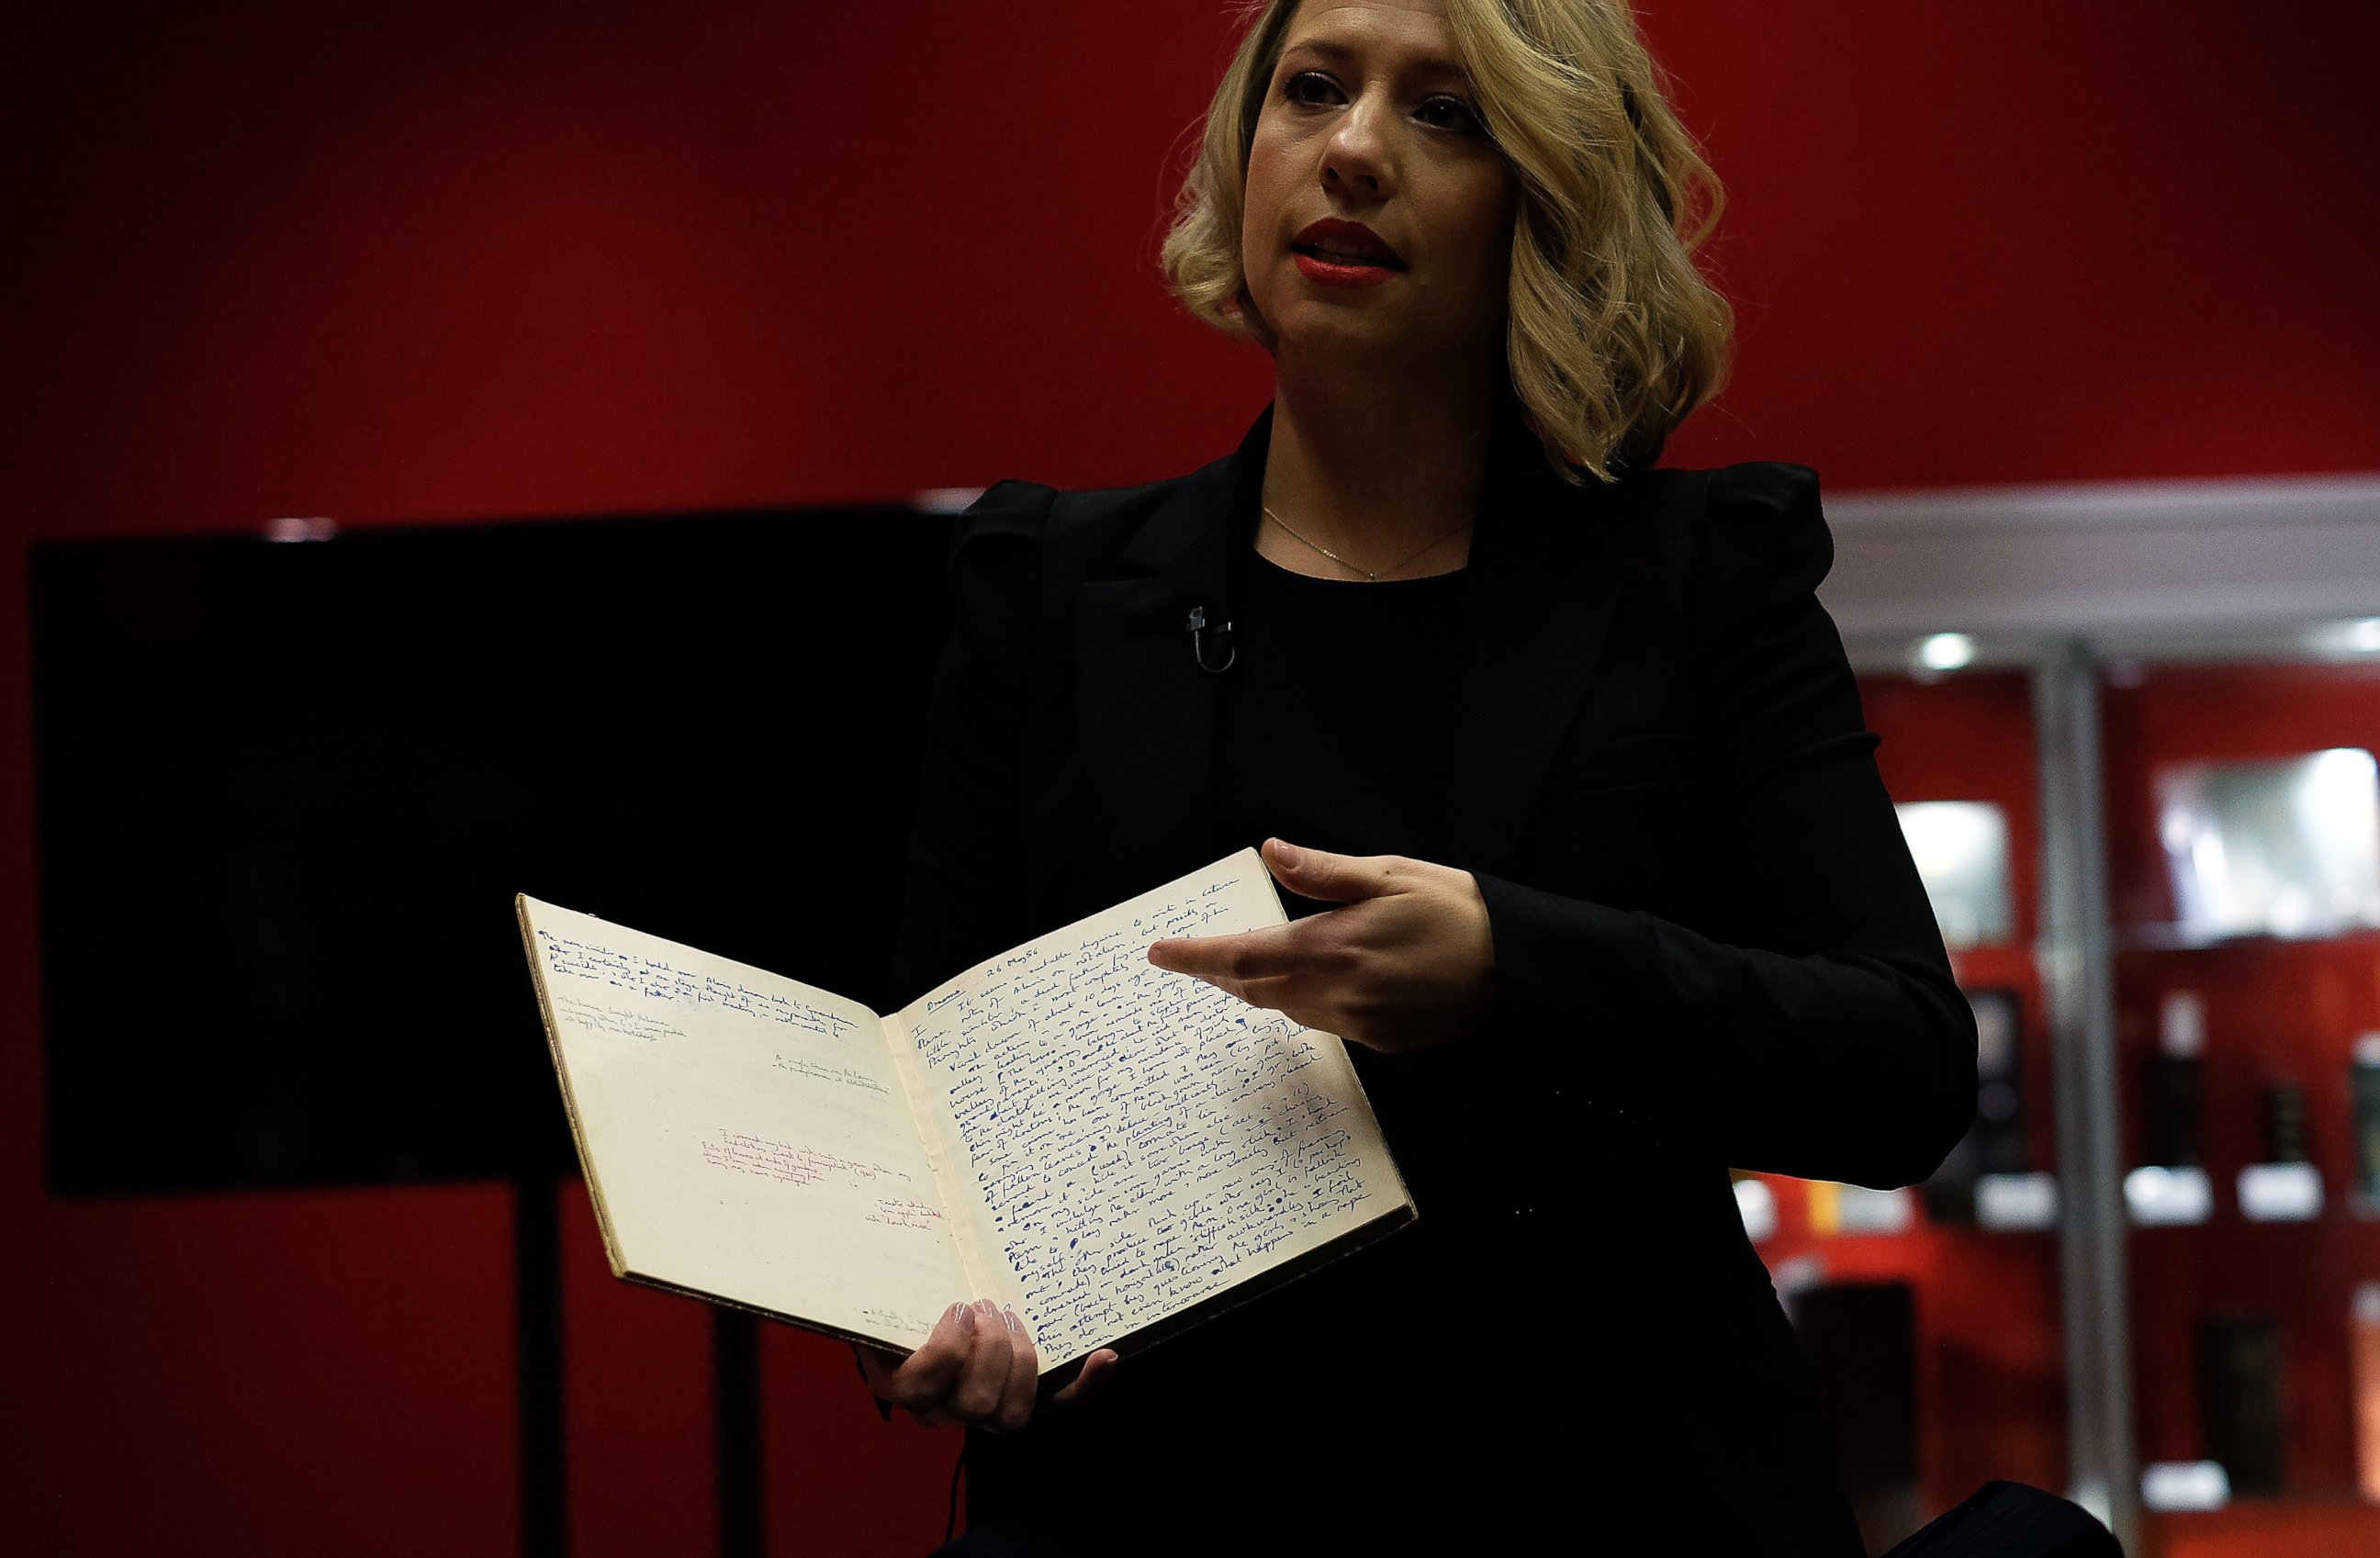 PHOTO: Bonhams' History of Science and Technology department director Cassandra Hatton shows a handwritten manuscript belonging to British mathematician Alan Turing in New York on April 9, 2015.